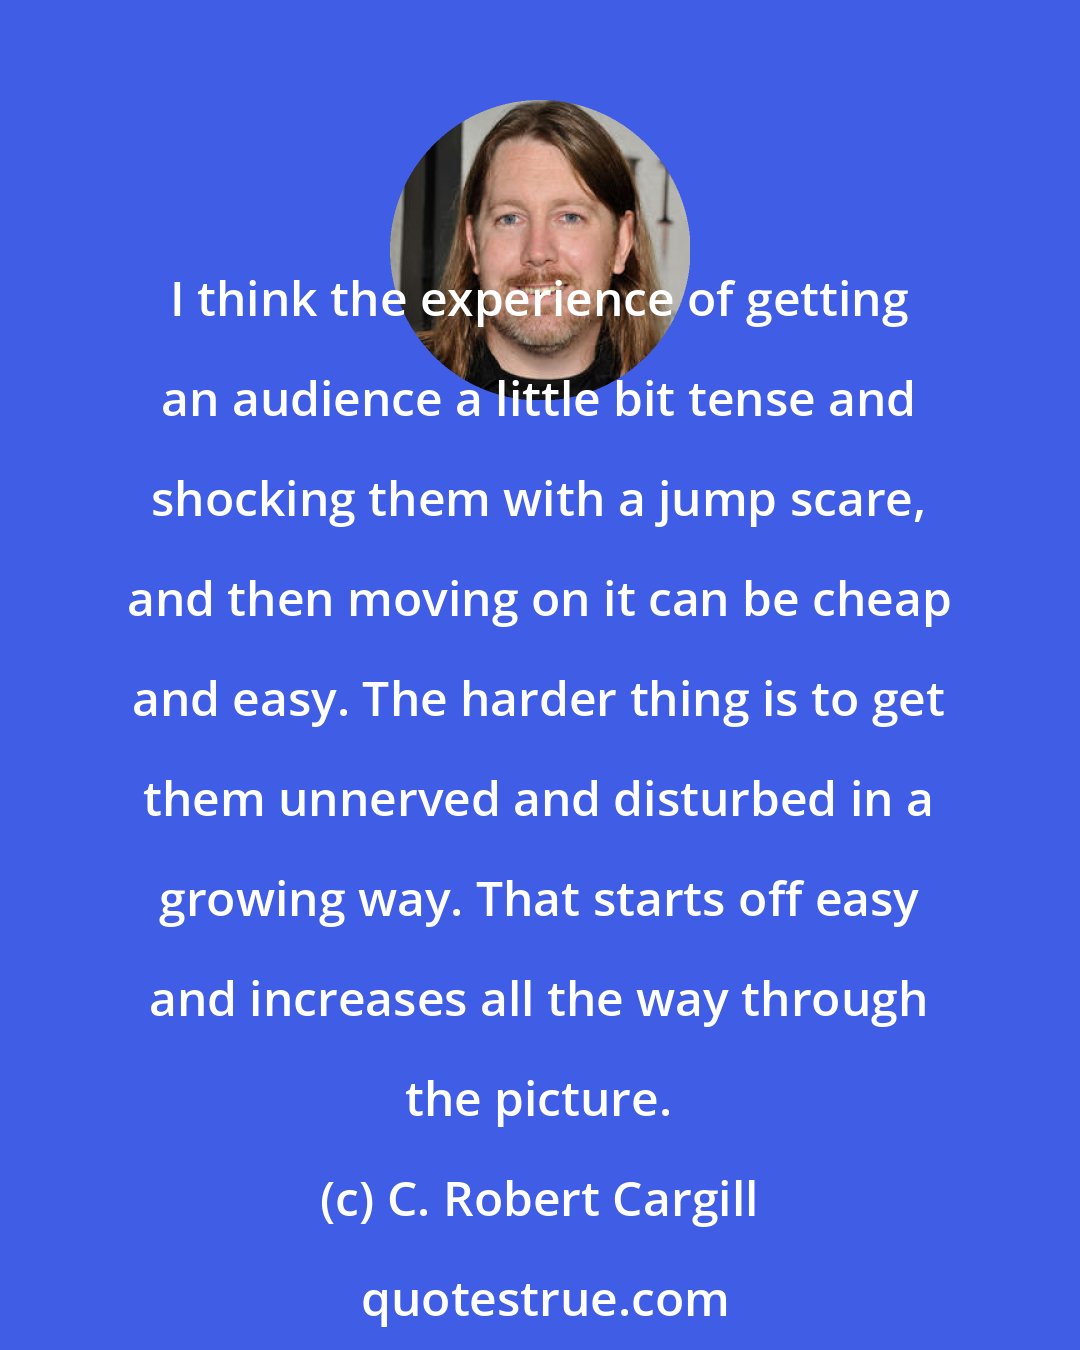 C. Robert Cargill: I think the experience of getting an audience a little bit tense and shocking them with a jump scare, and then moving on it can be cheap and easy. The harder thing is to get them unnerved and disturbed in a growing way. That starts off easy and increases all the way through the picture.